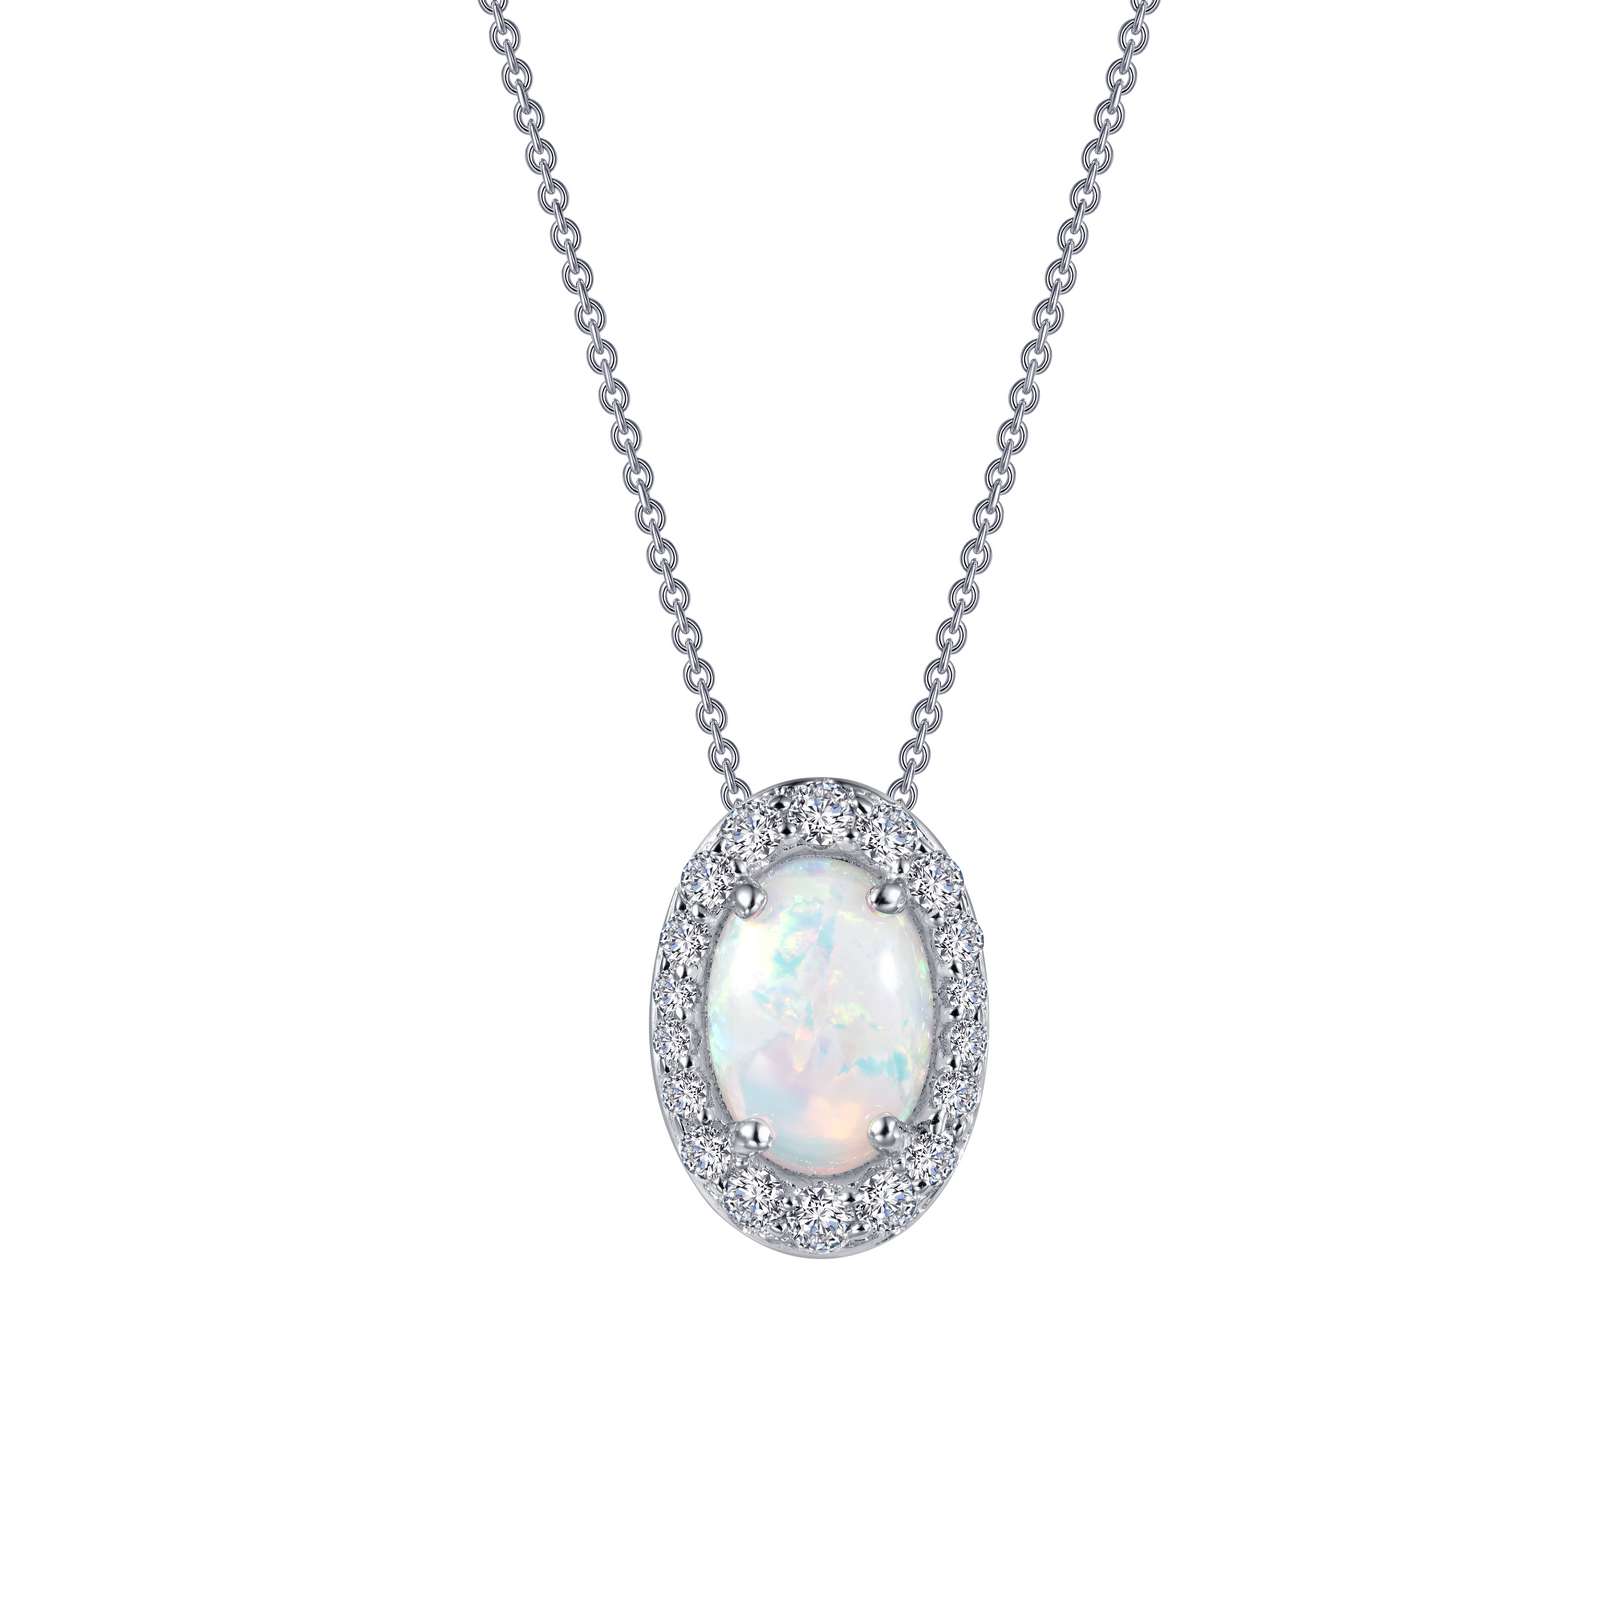 Classic Halo Pendant Necklace - Inspired by the charm of the past, this simulated opal halo pendant is set with Lafonn's signature Lassaire simulated diamonds in sterling silver bonded with platinum. The pendant comes on an adjustable 18